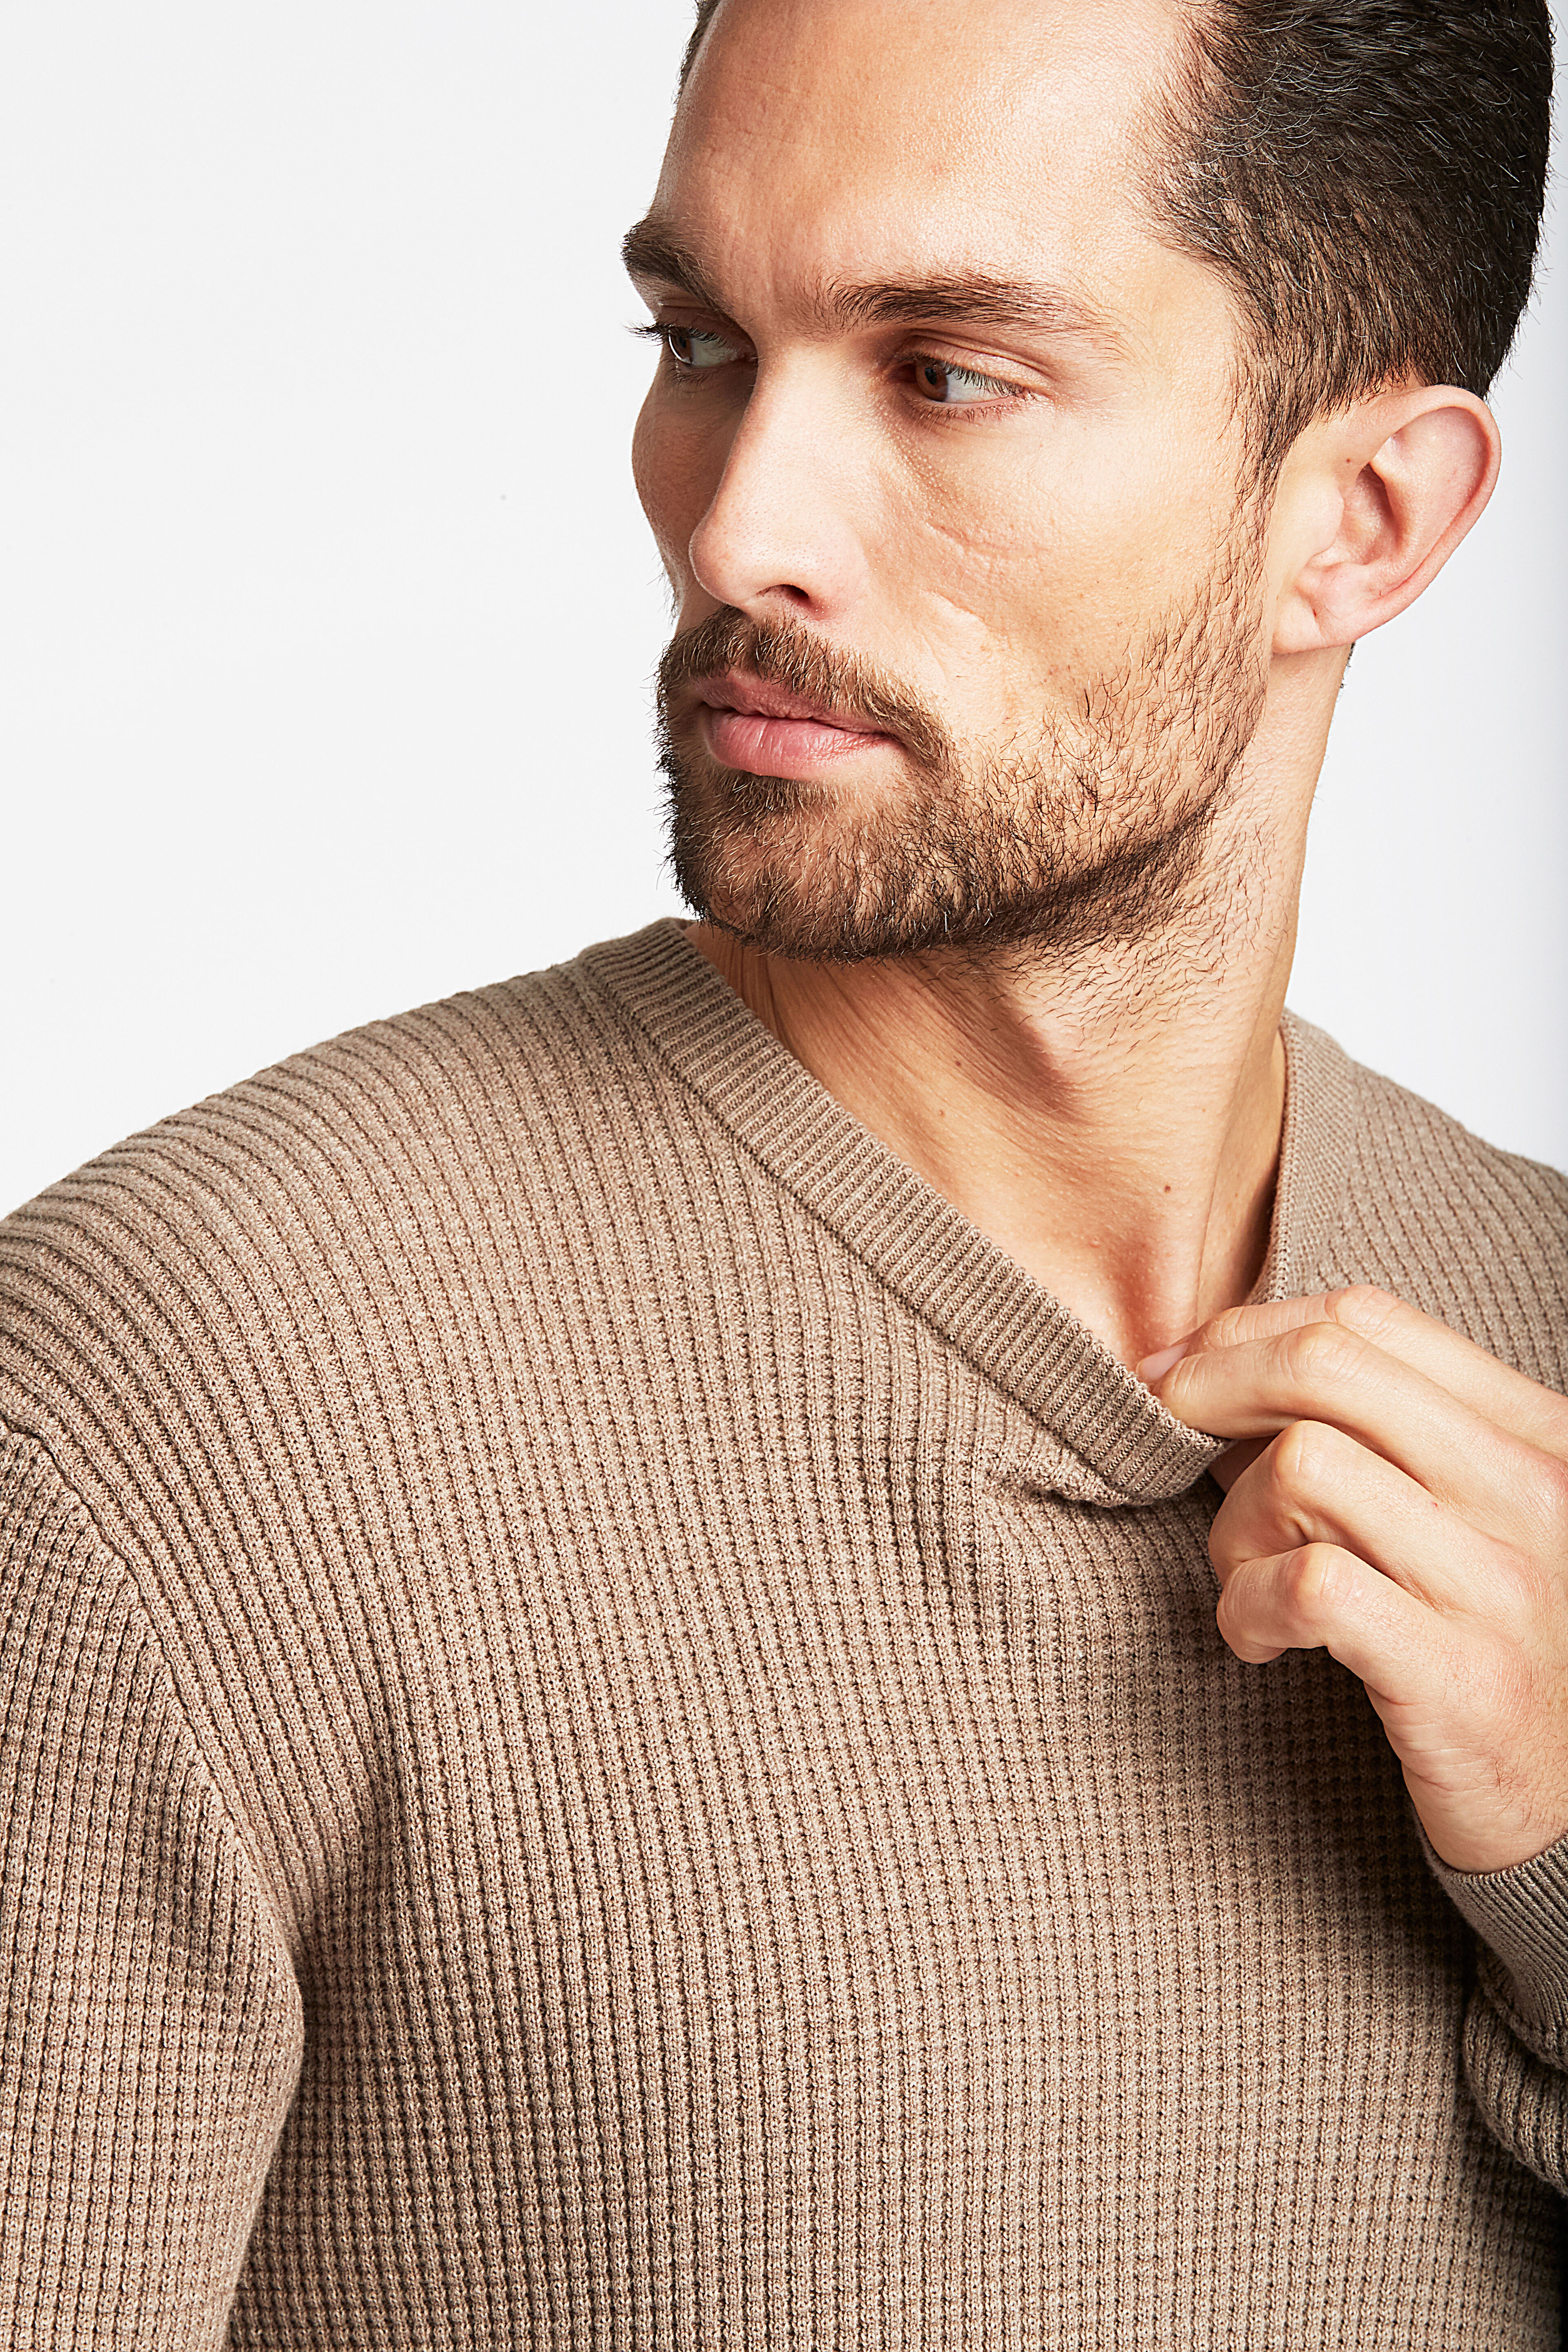 Strickpullover | Relaxed fit 30-824019